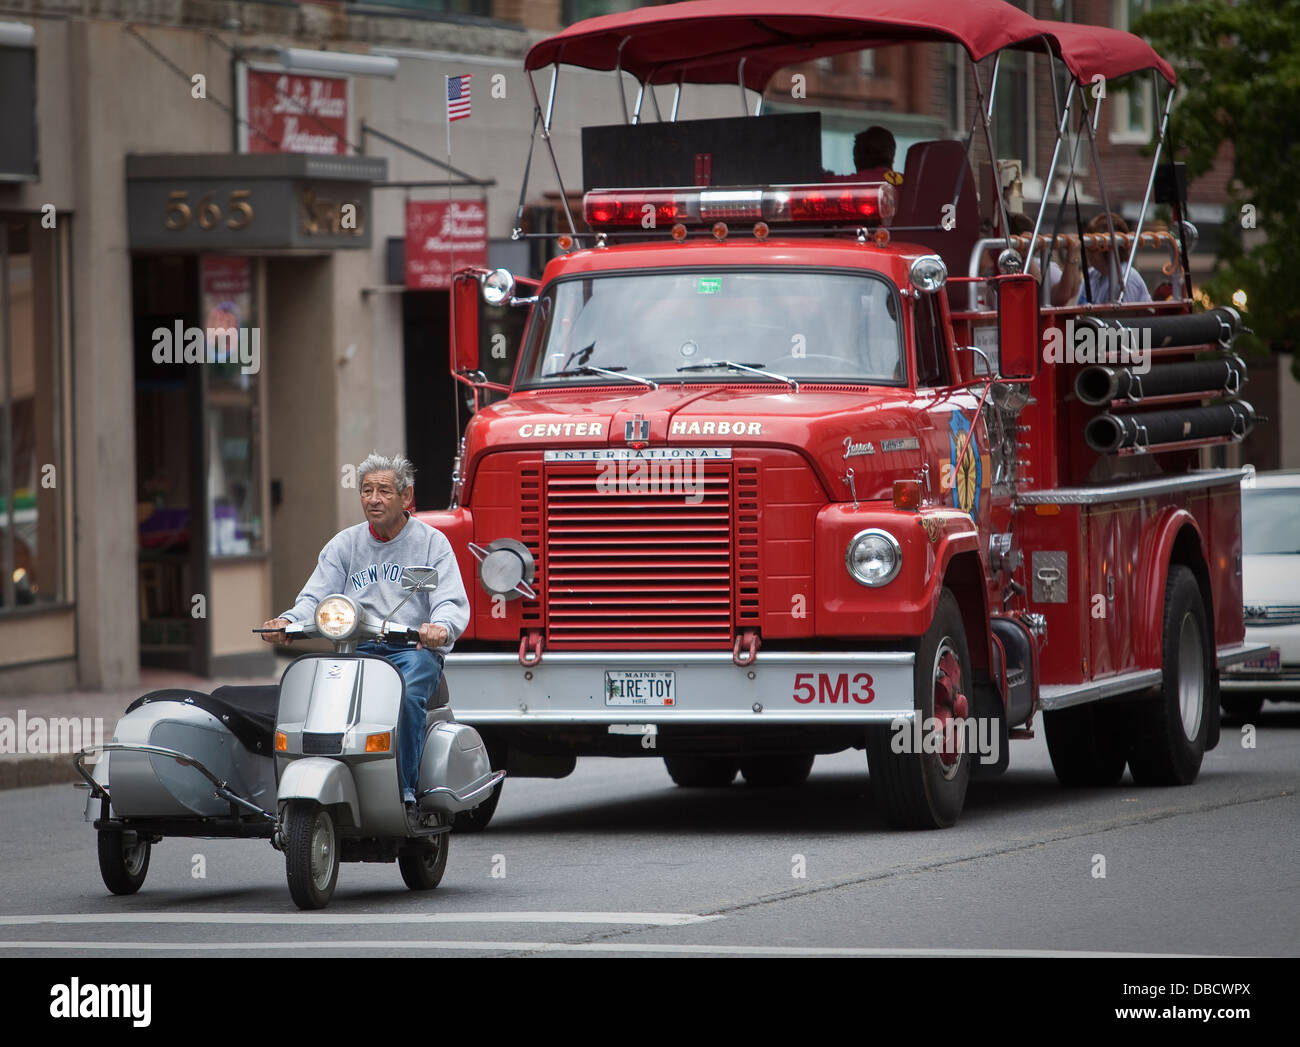 A firetruck converted into a tourist bus and a moped with a sidecar are pictured in Portland, Maine Stock Photo